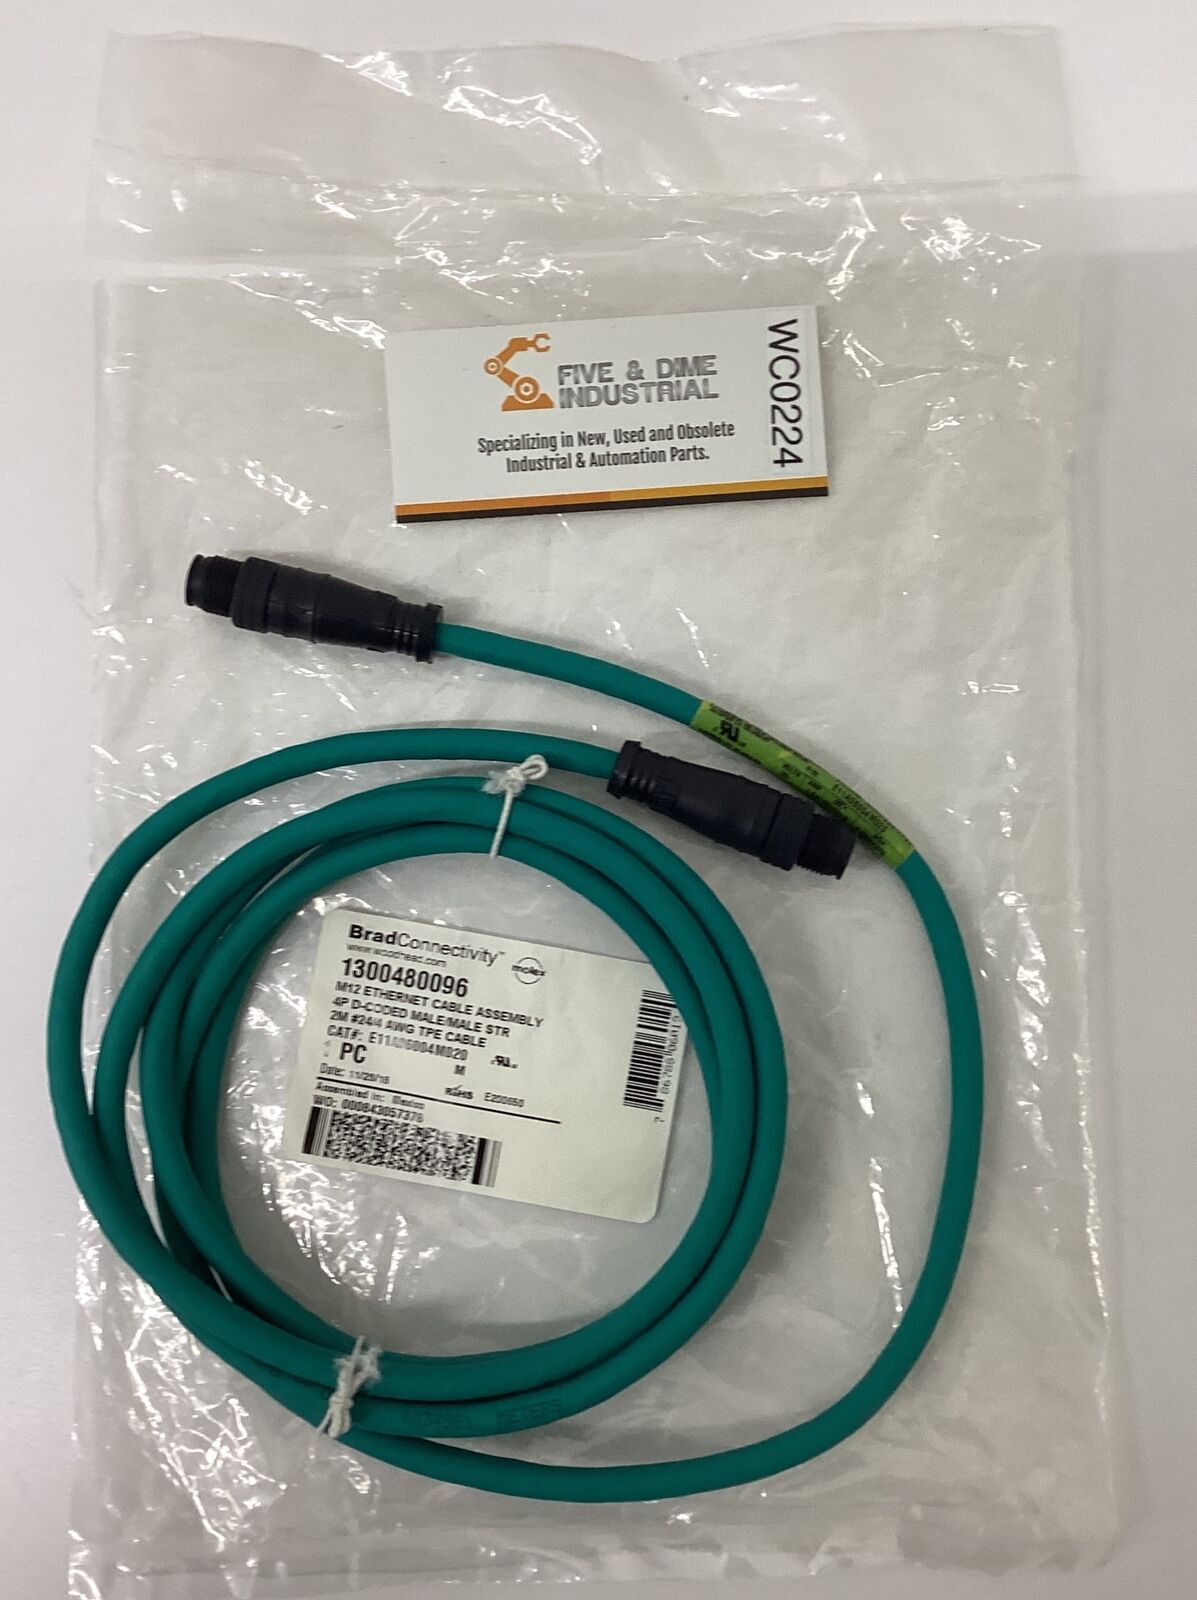 Brad Harrison 1300480096 M12  Male/Male Ethernet Cable 2 Meters (GR185)